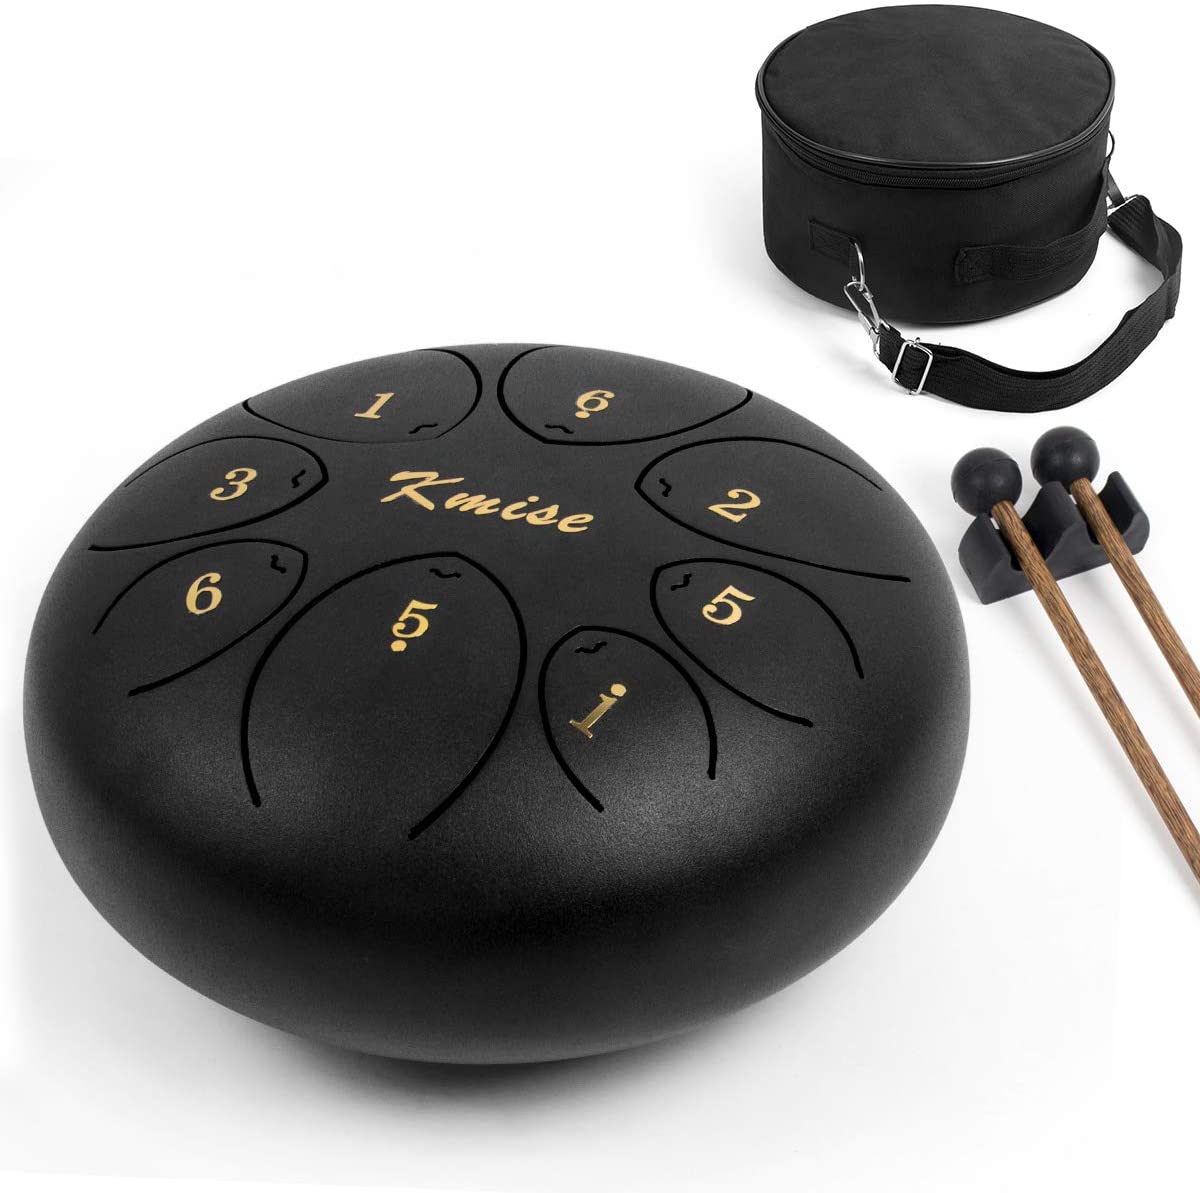 Steel Tongue Drum 8 Inch 8 Notes Kmise Handpan Drum Kit Tank Drum Percussion Instrument with Drum Mallets Carry Bag Music Book for Beginner Adult Kids - AKLOT